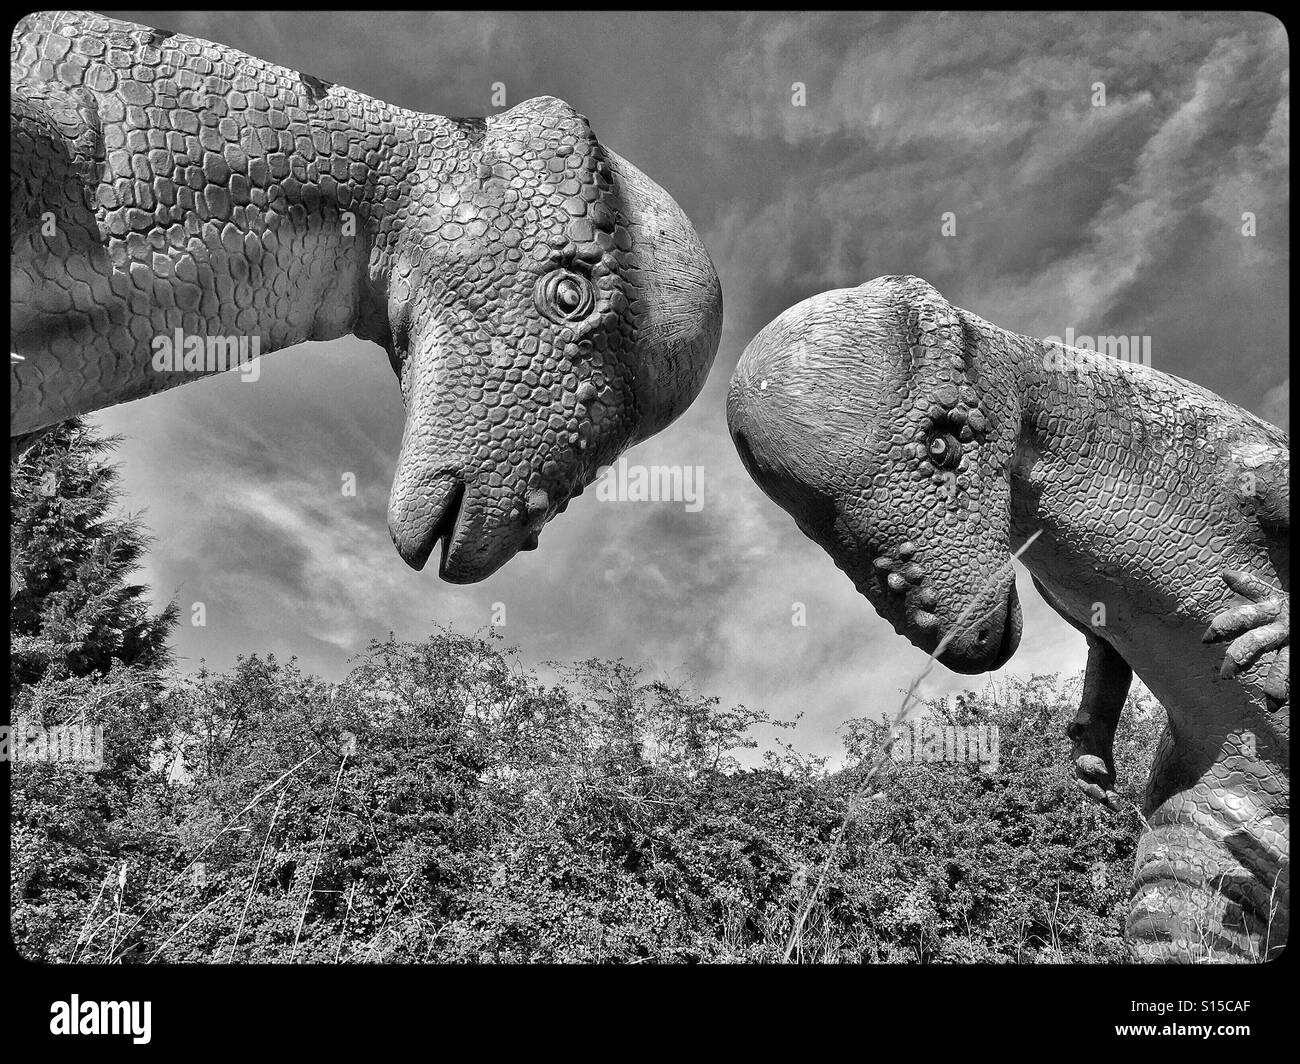 A Monochrome Image Of 2 Pachycephalosaur Dinosaurs Fighting These Extinct Herbivores Used The Tops Of Their